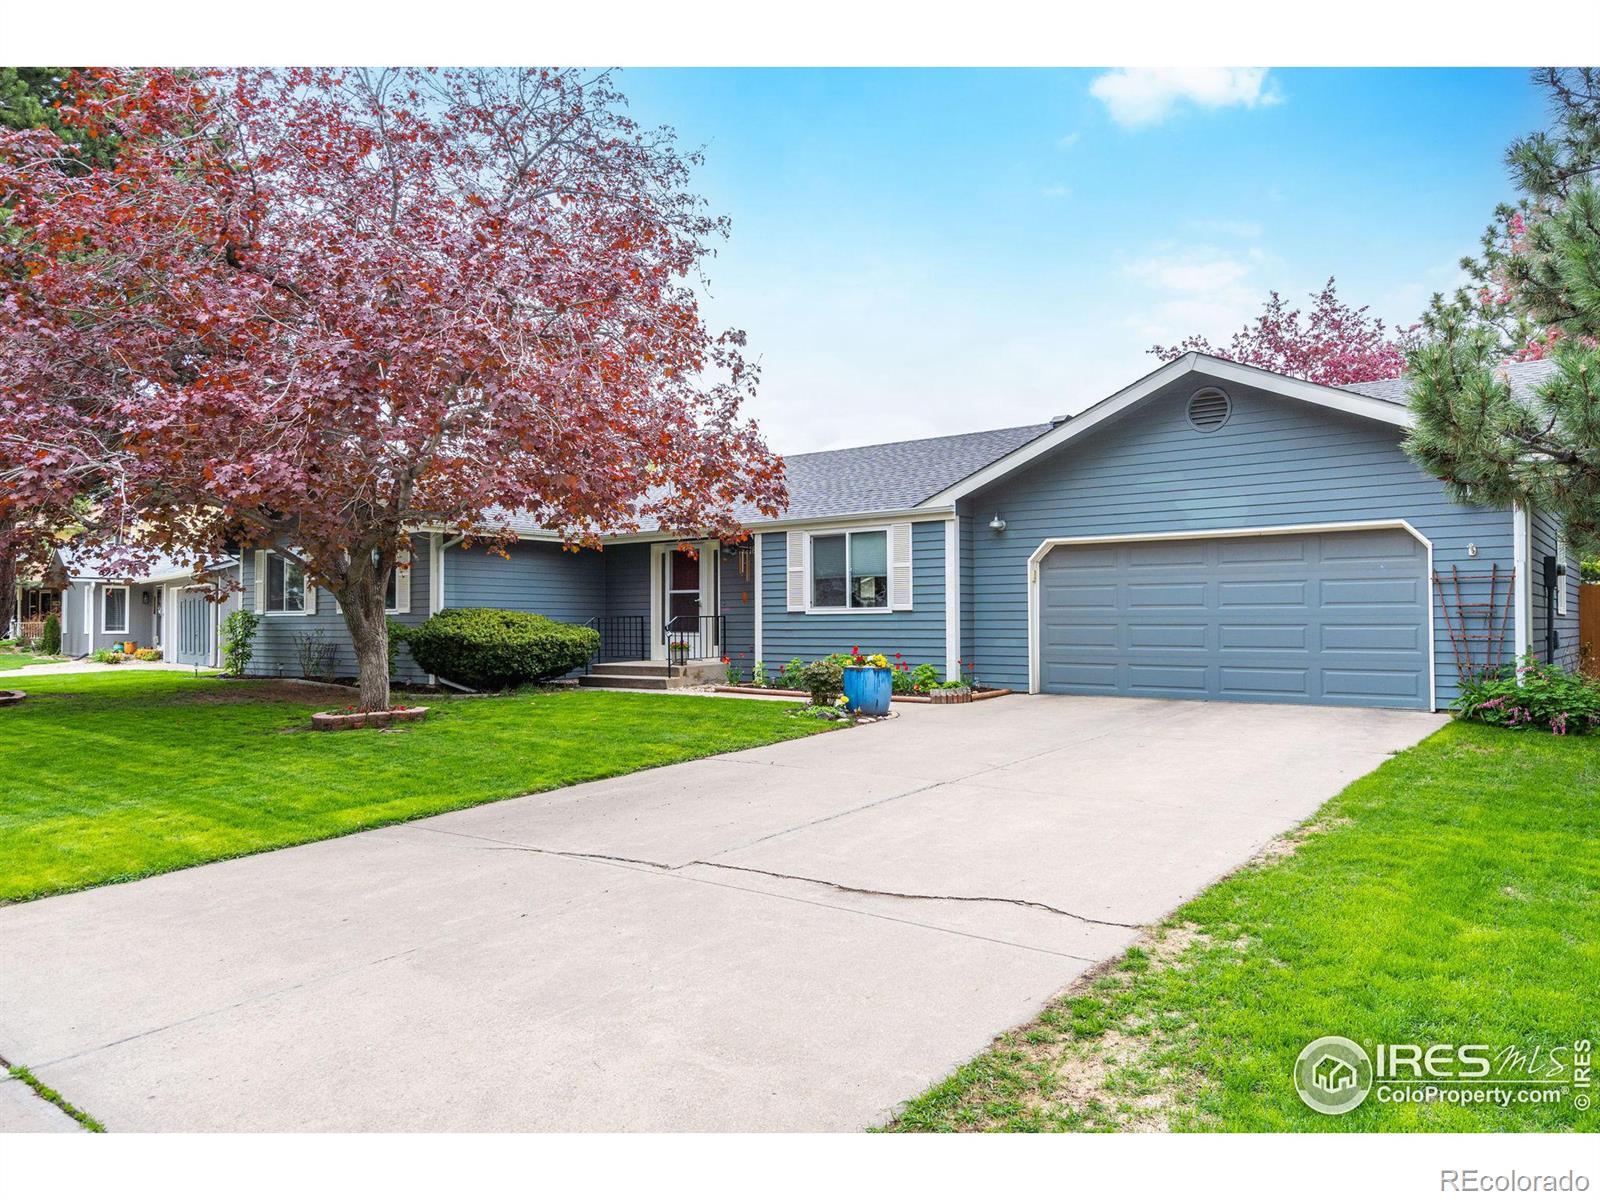 Report Image for 3218  Wedgewood Court,Fort Collins, Colorado